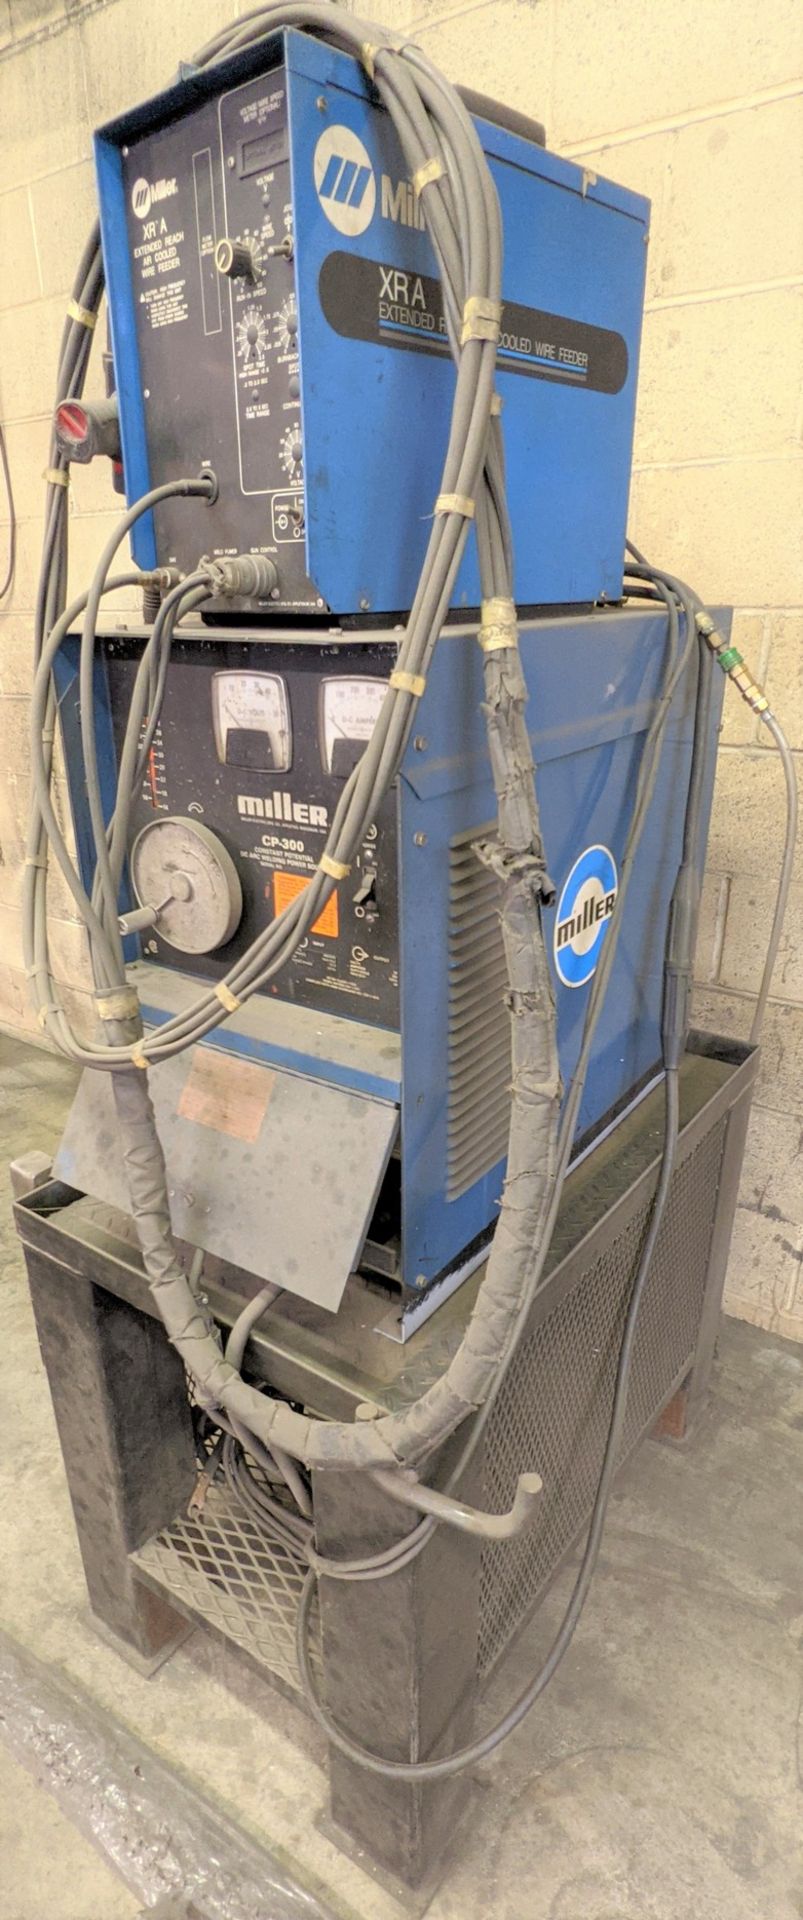 MILLER CP300 WELDER W/ MILLER XRA EXTENDED REACH AIR COOLED WIRE FEEDER, XR15 AIR COOLED PUSH/PULL